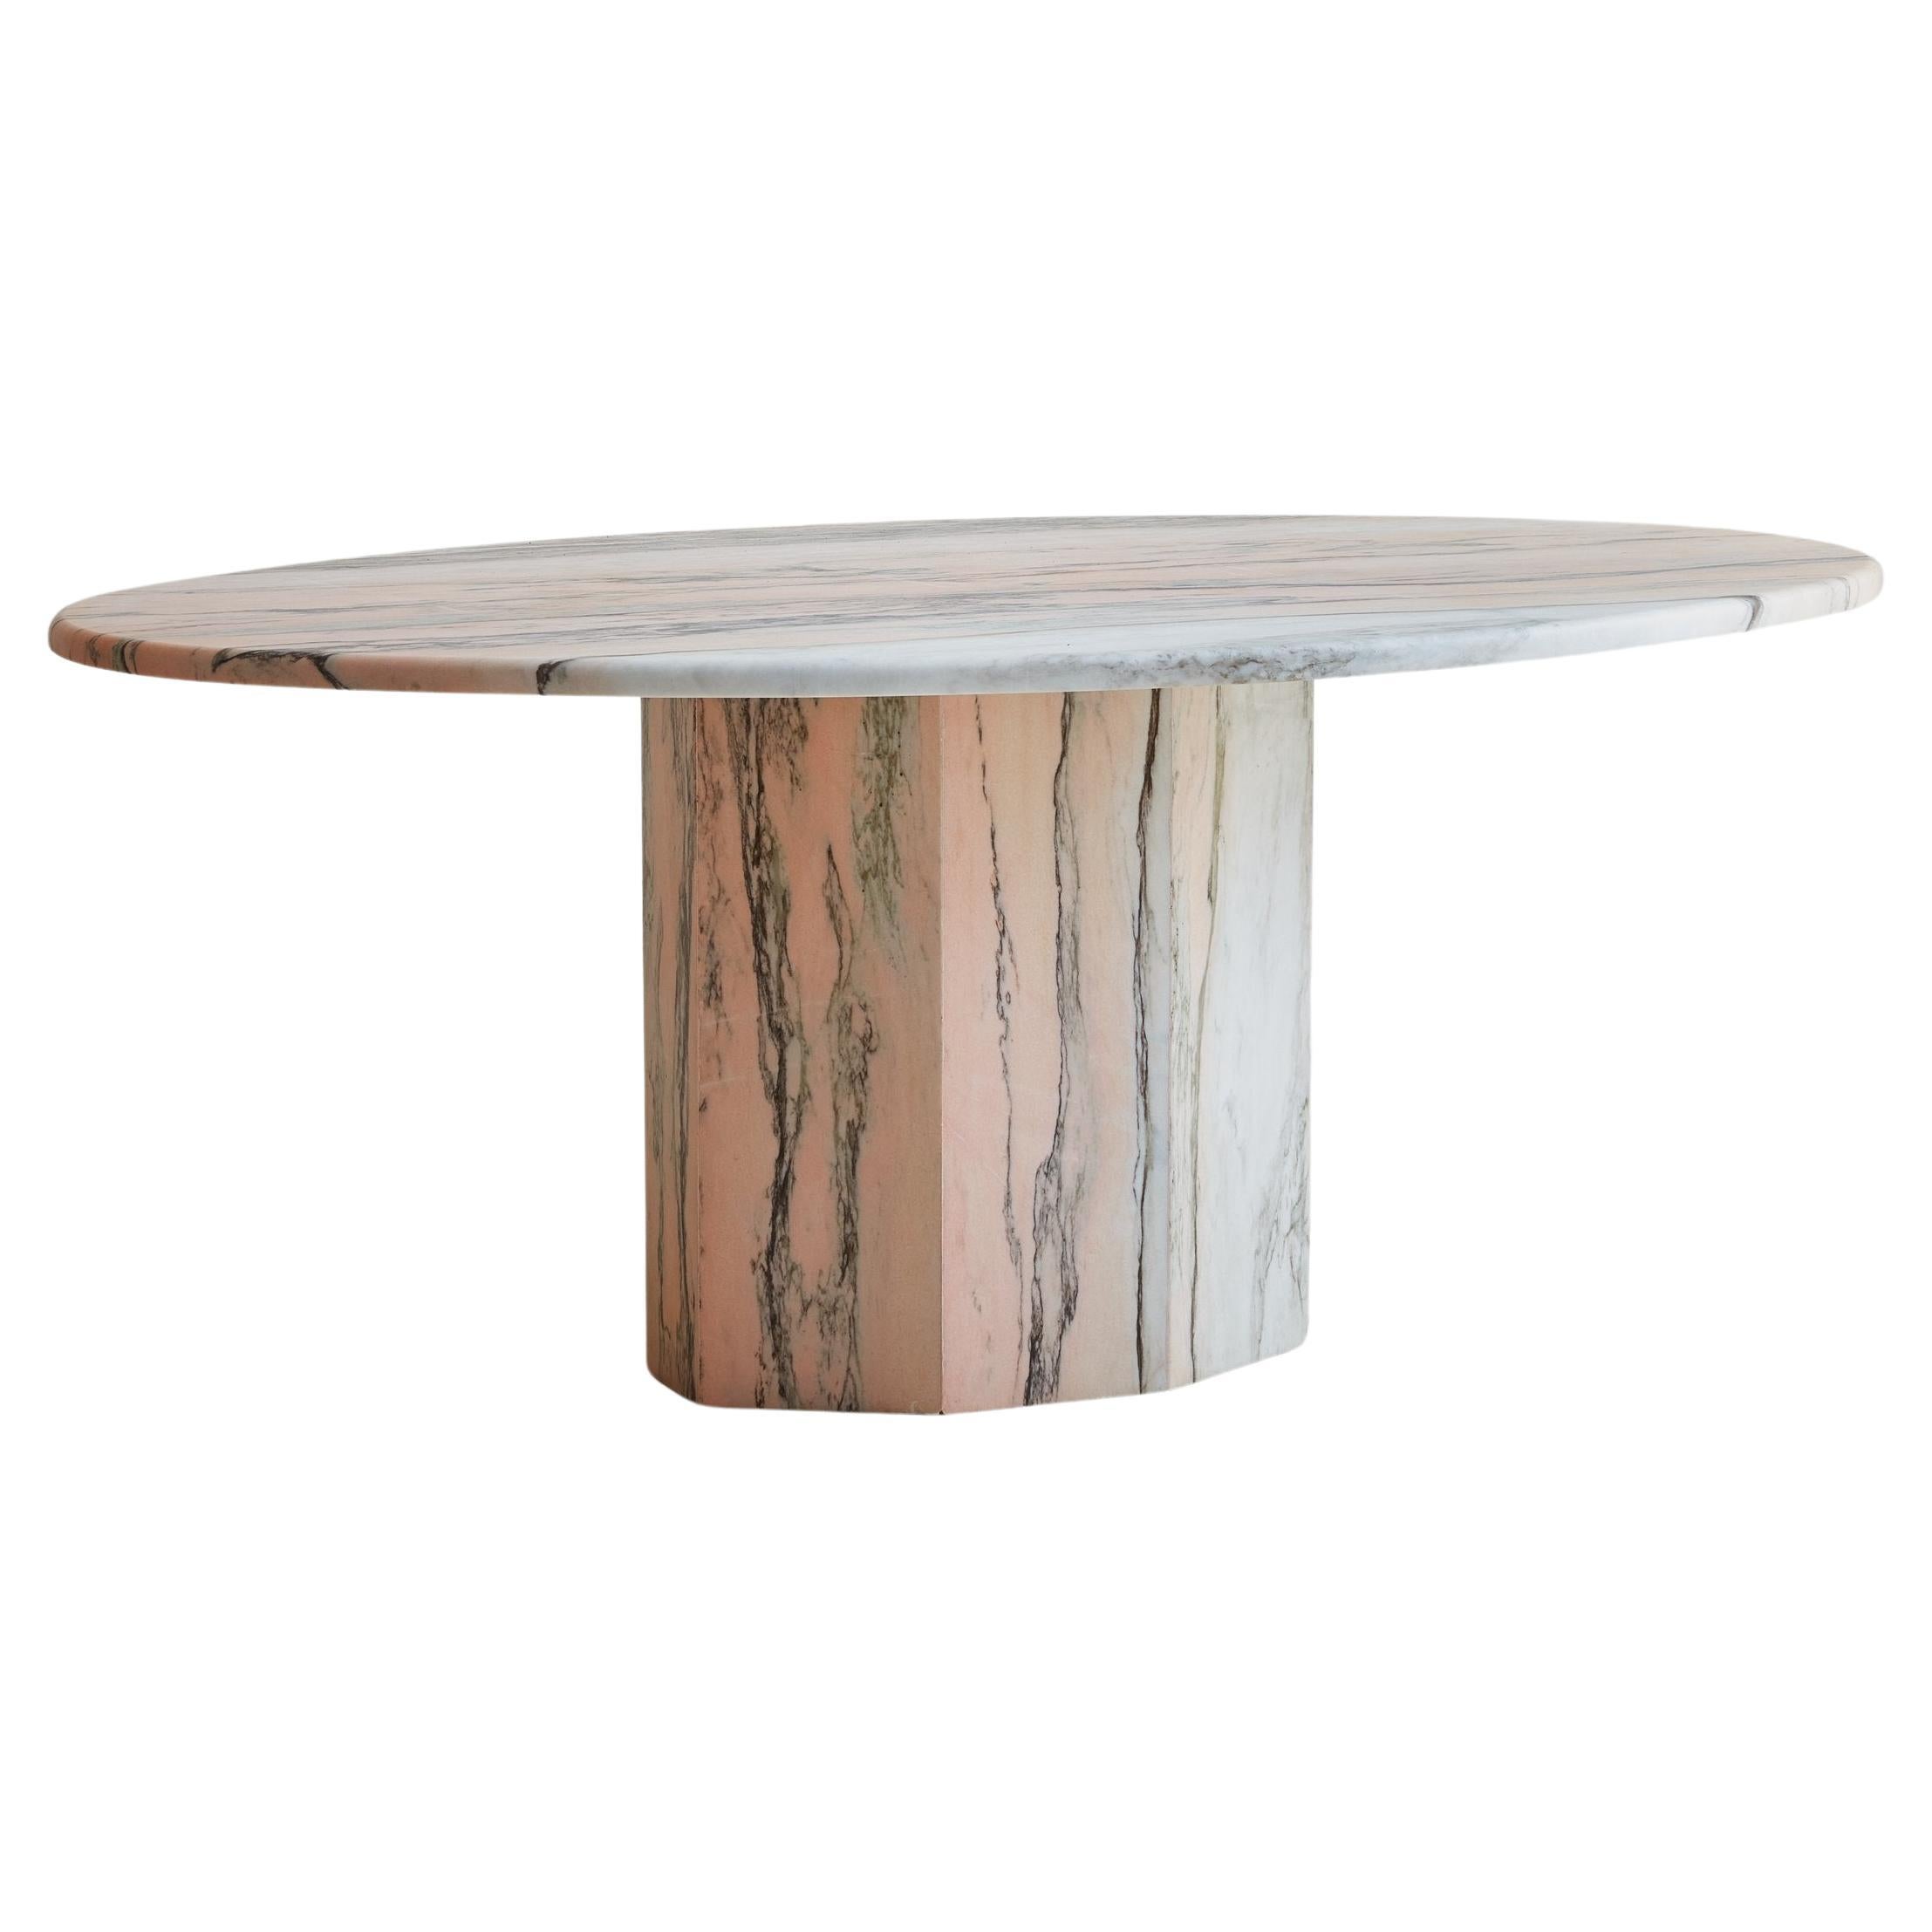 Oval Pink Portuguese Marble Dining Table with Faceted Base, Spain 1970s For Sale